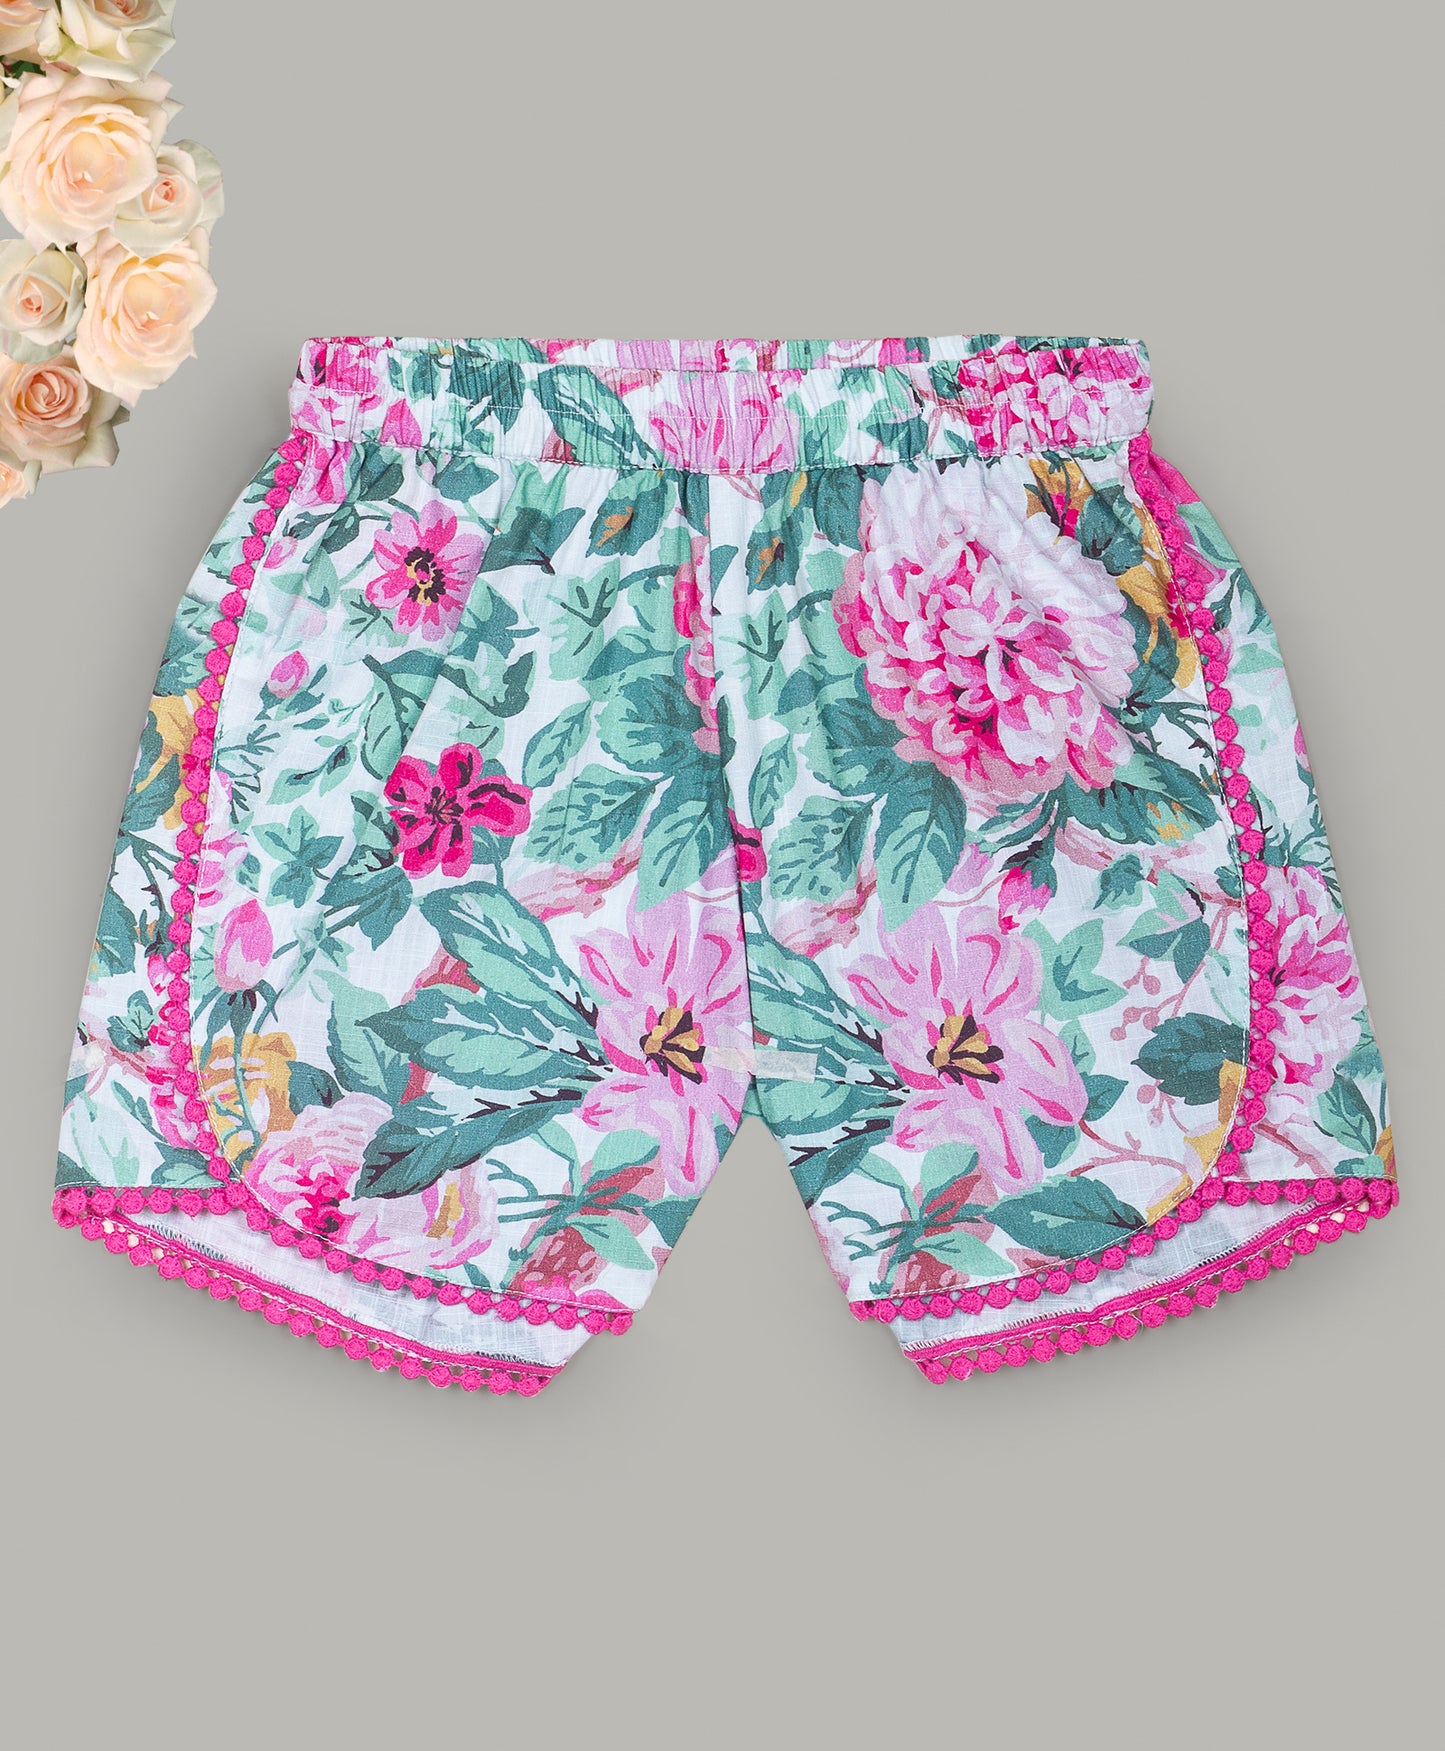 Floral Print Shorts with contrast lace along all seams